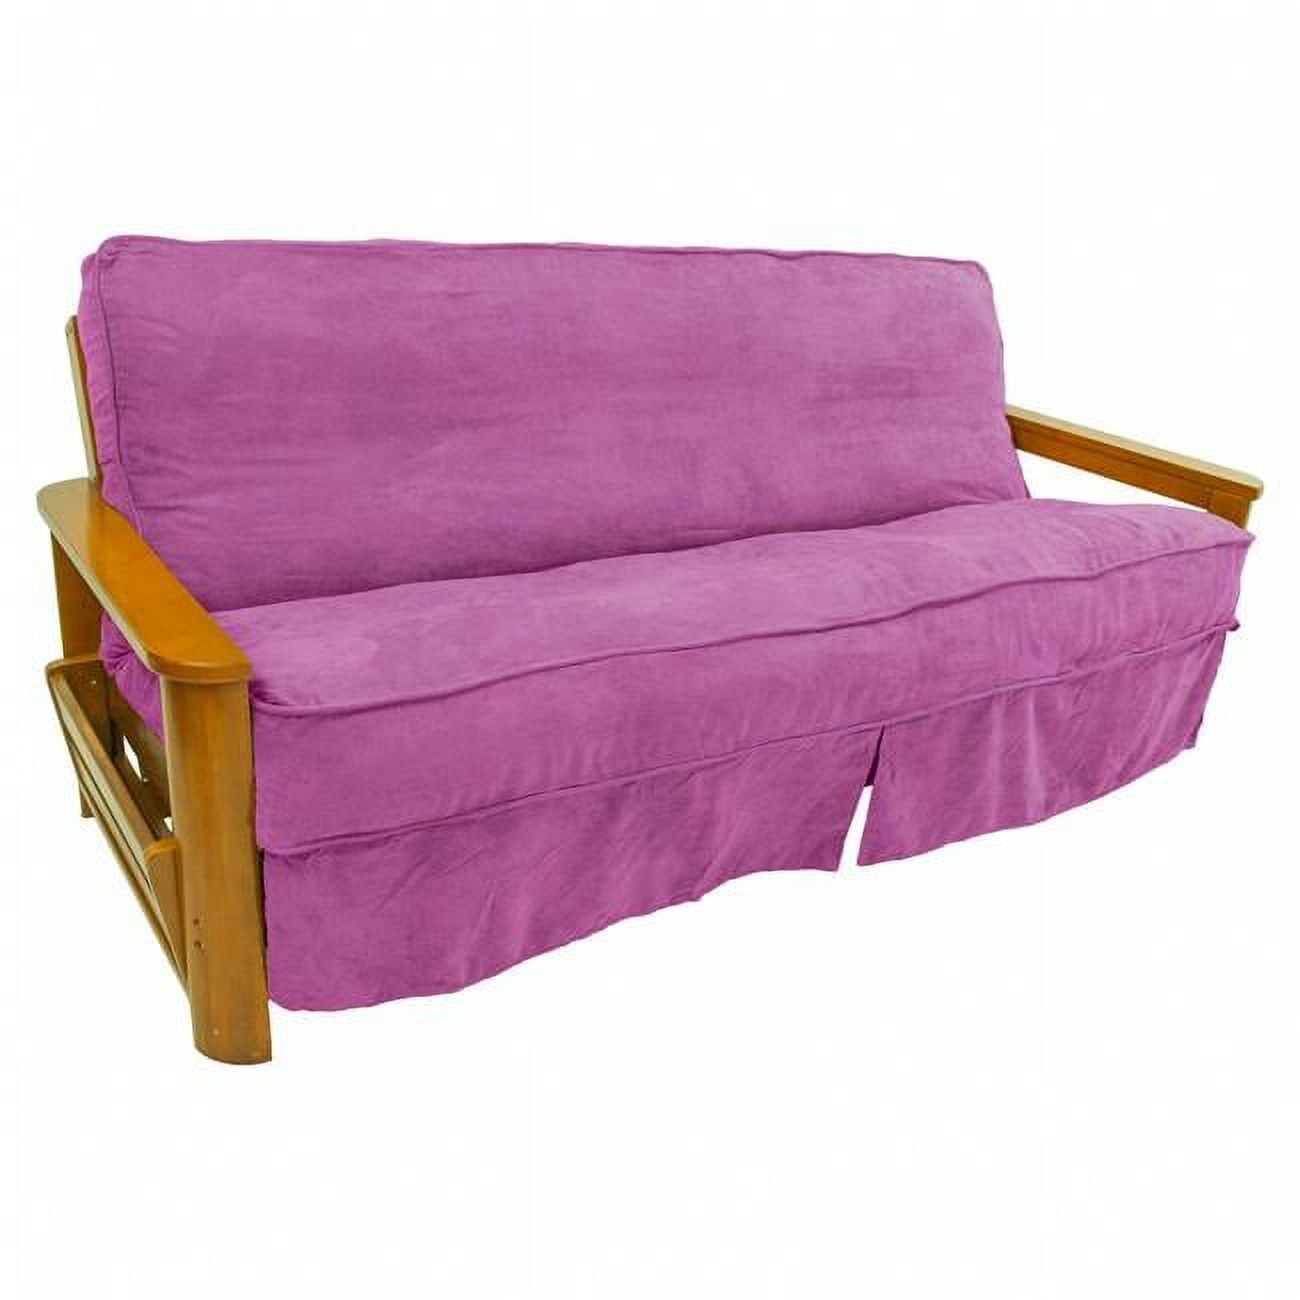 Picture of Blazing Needles 9670-CD-MS-UV 8 to 9 in. Solid Microsuede Double Corded Full Futon Slipcover, Ultra Violet